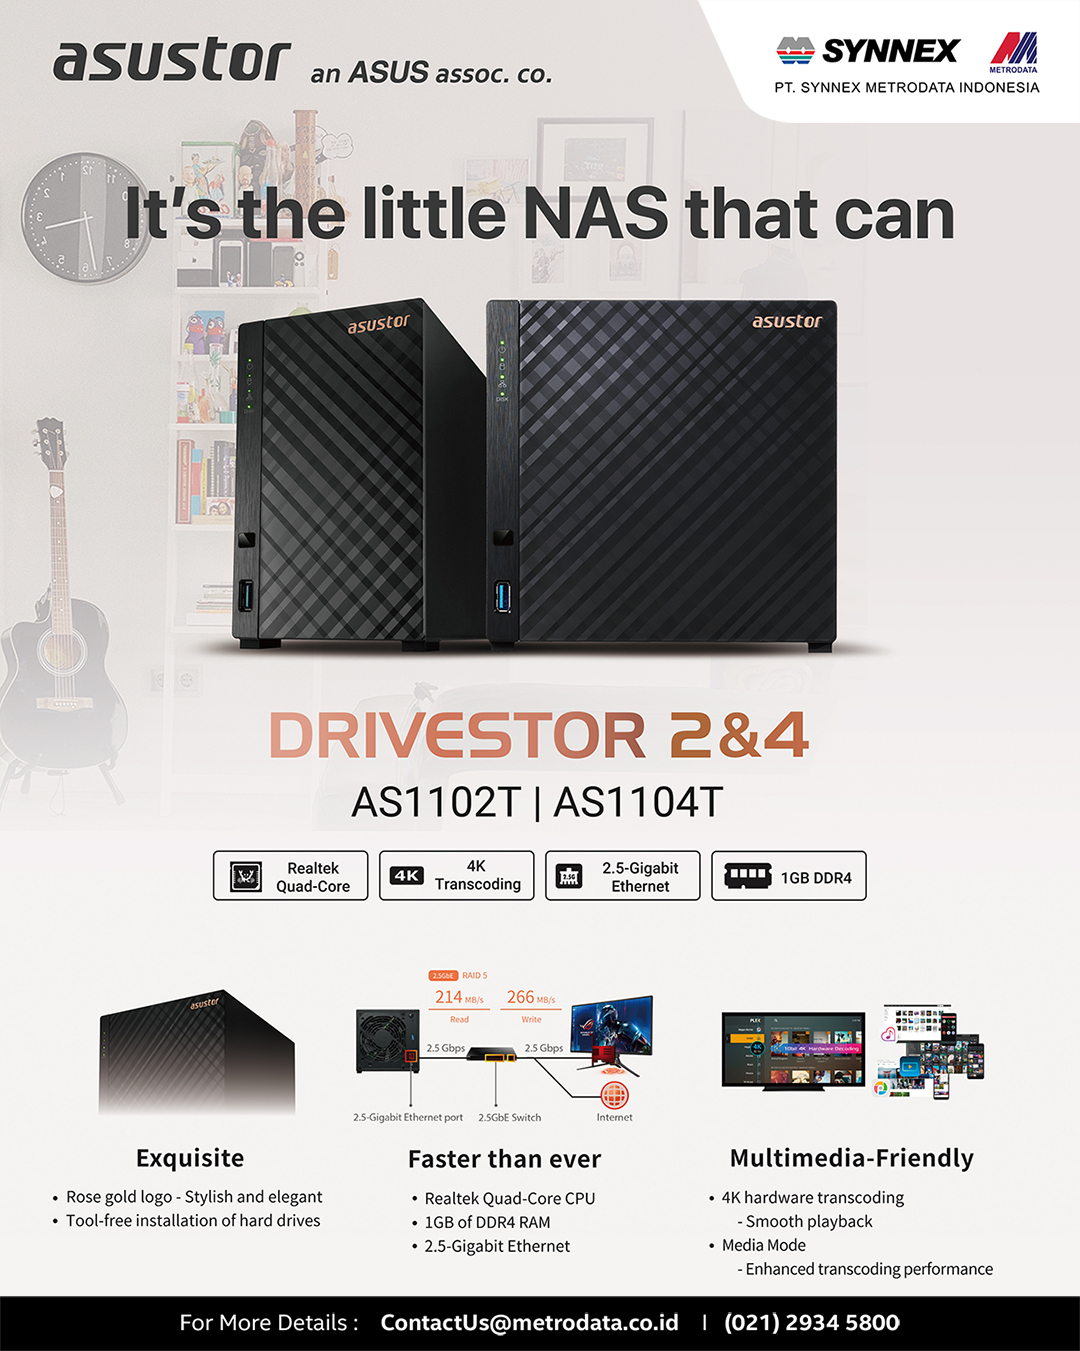 New Product : ASUSTOR Driverstore 2 & 4